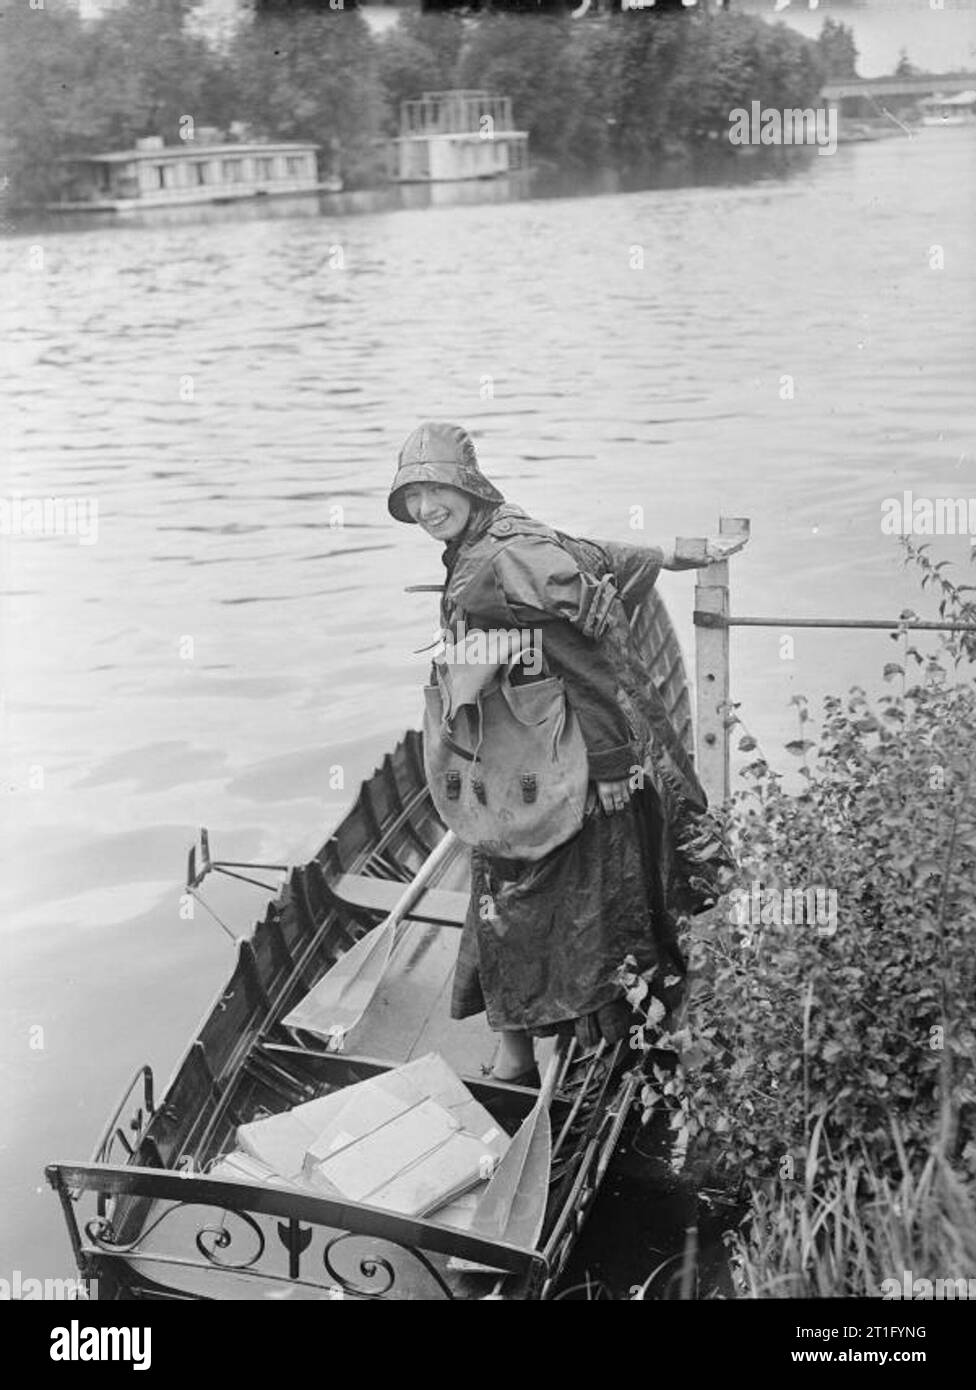 Women at work during the First World War A river postwoman smiles for the camera as she steps into her rowing boat from the bank. She is wearing oilskins and a sou'wester, to protect her from the rain. She is carrying a large sack of mail. Stock Photo